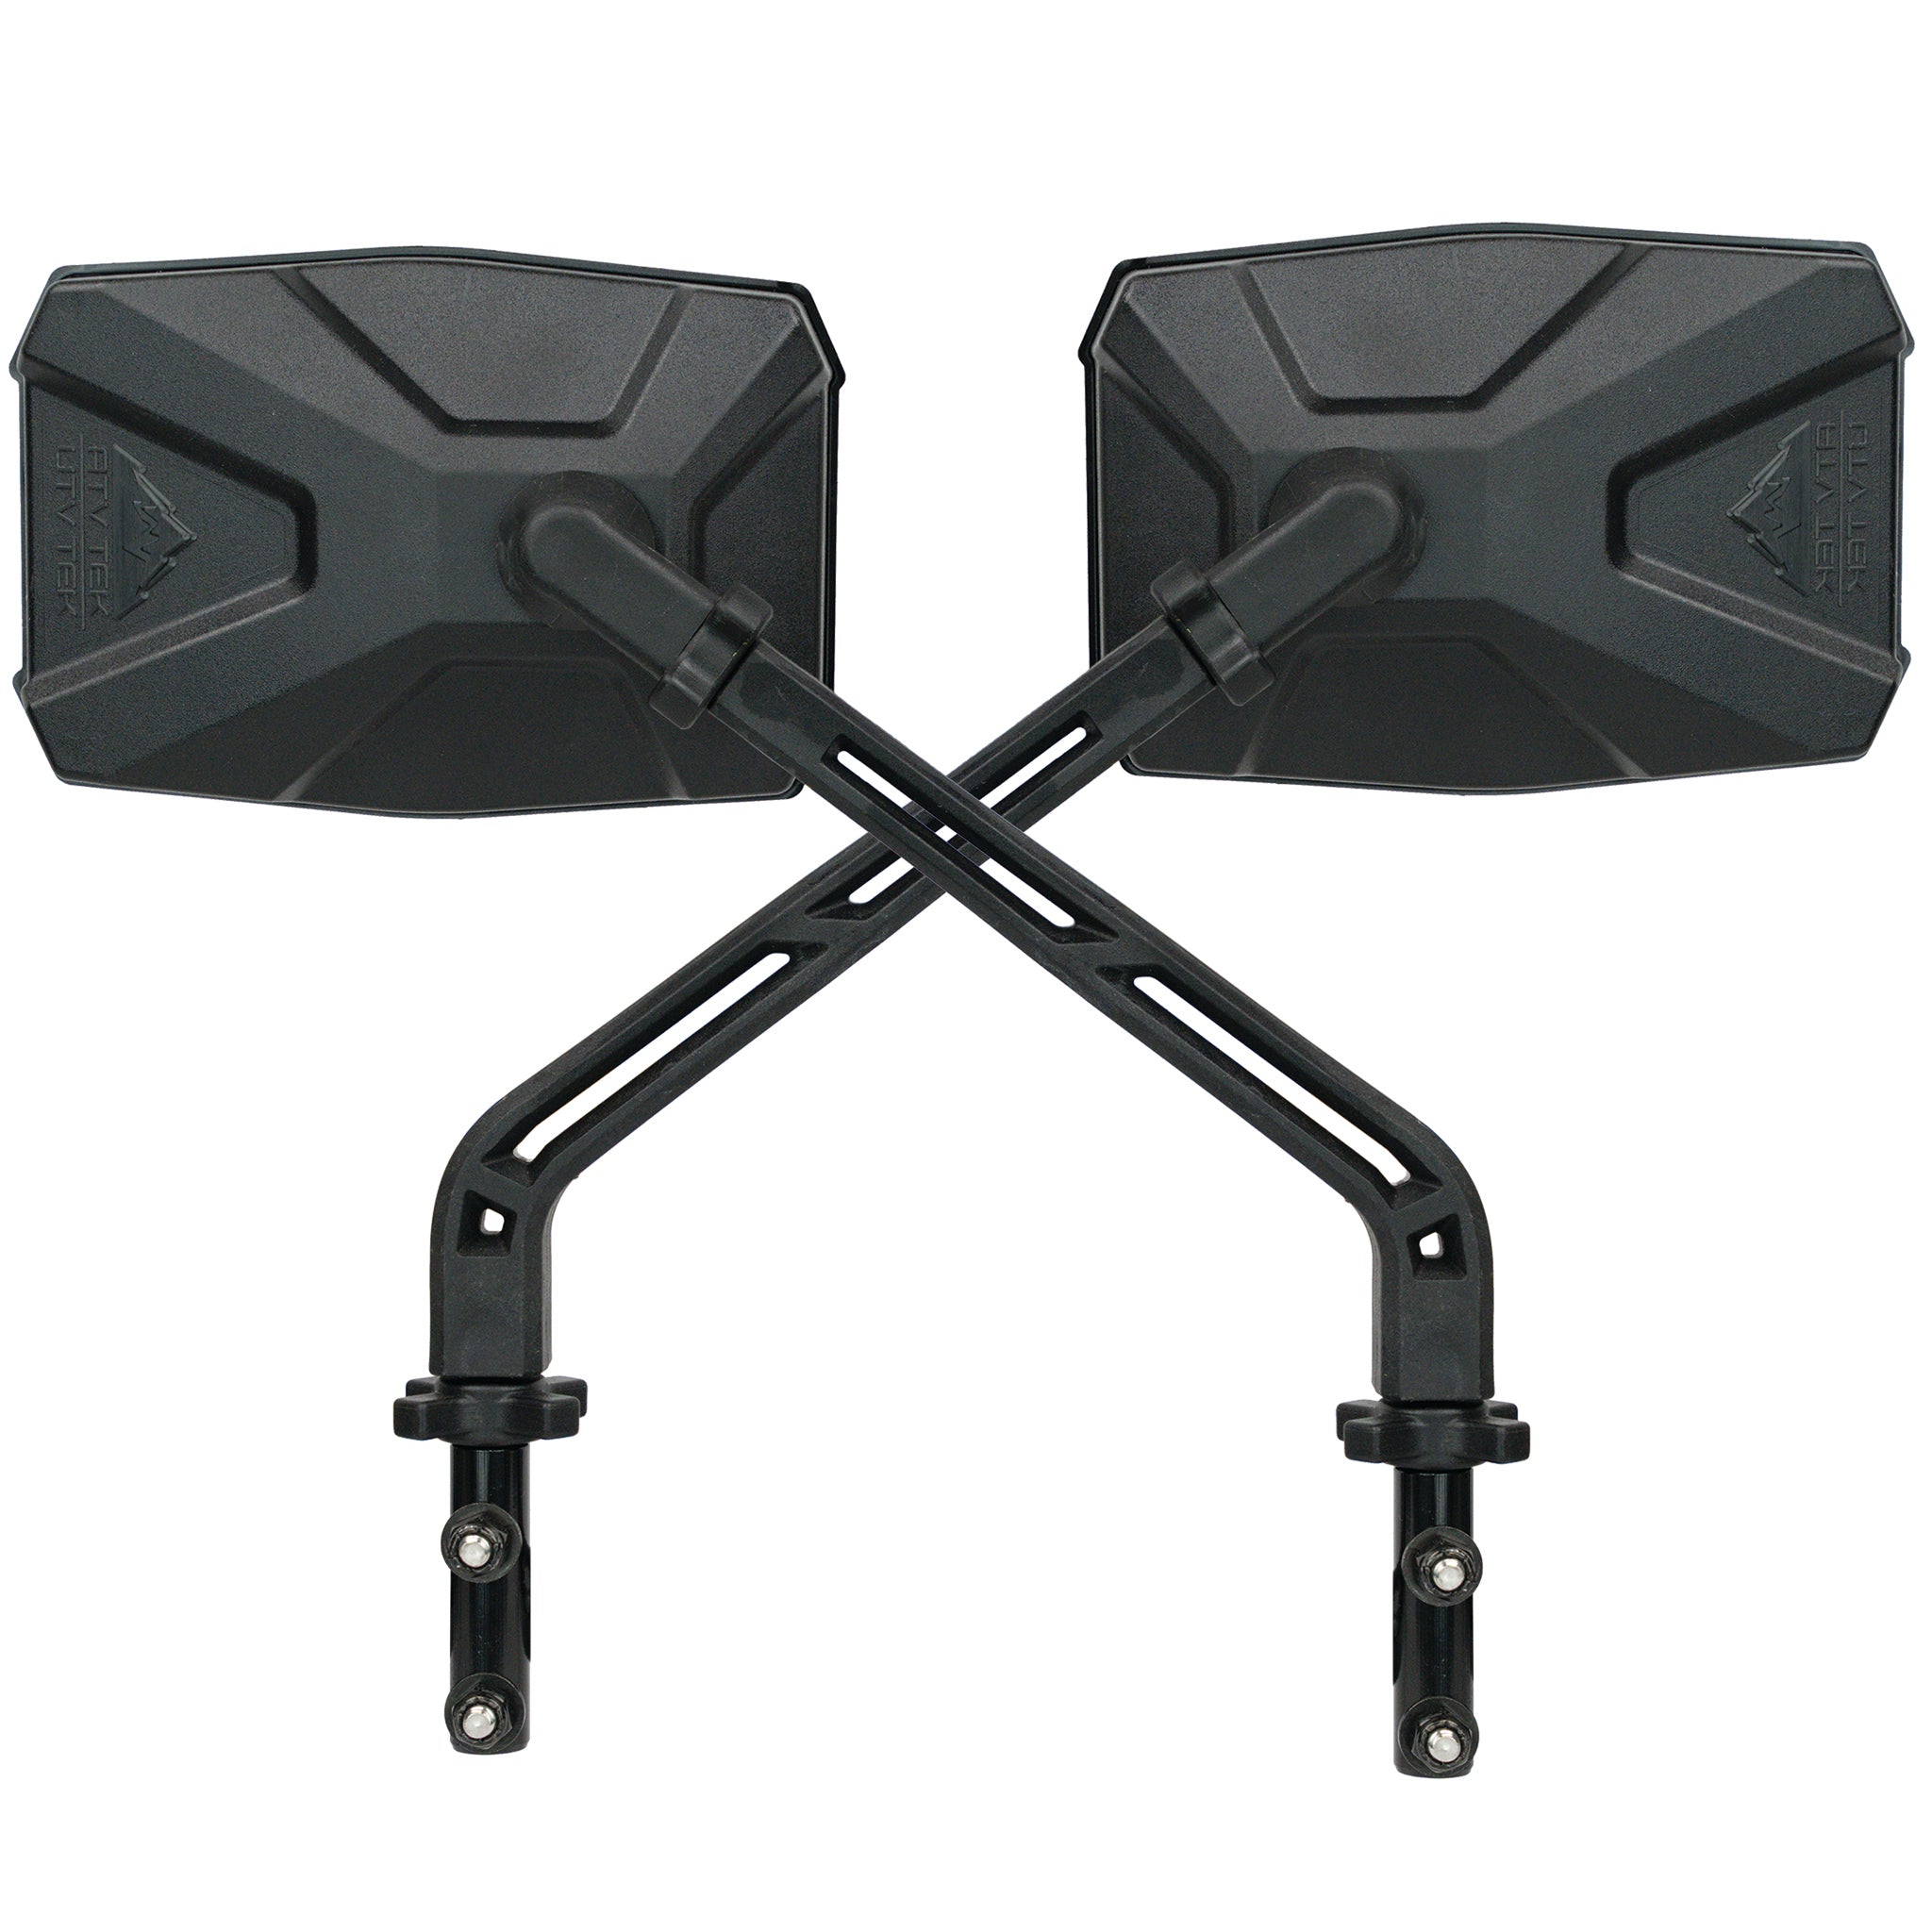 CLEARVIEW™ ATV MIRROR - 2 PACK